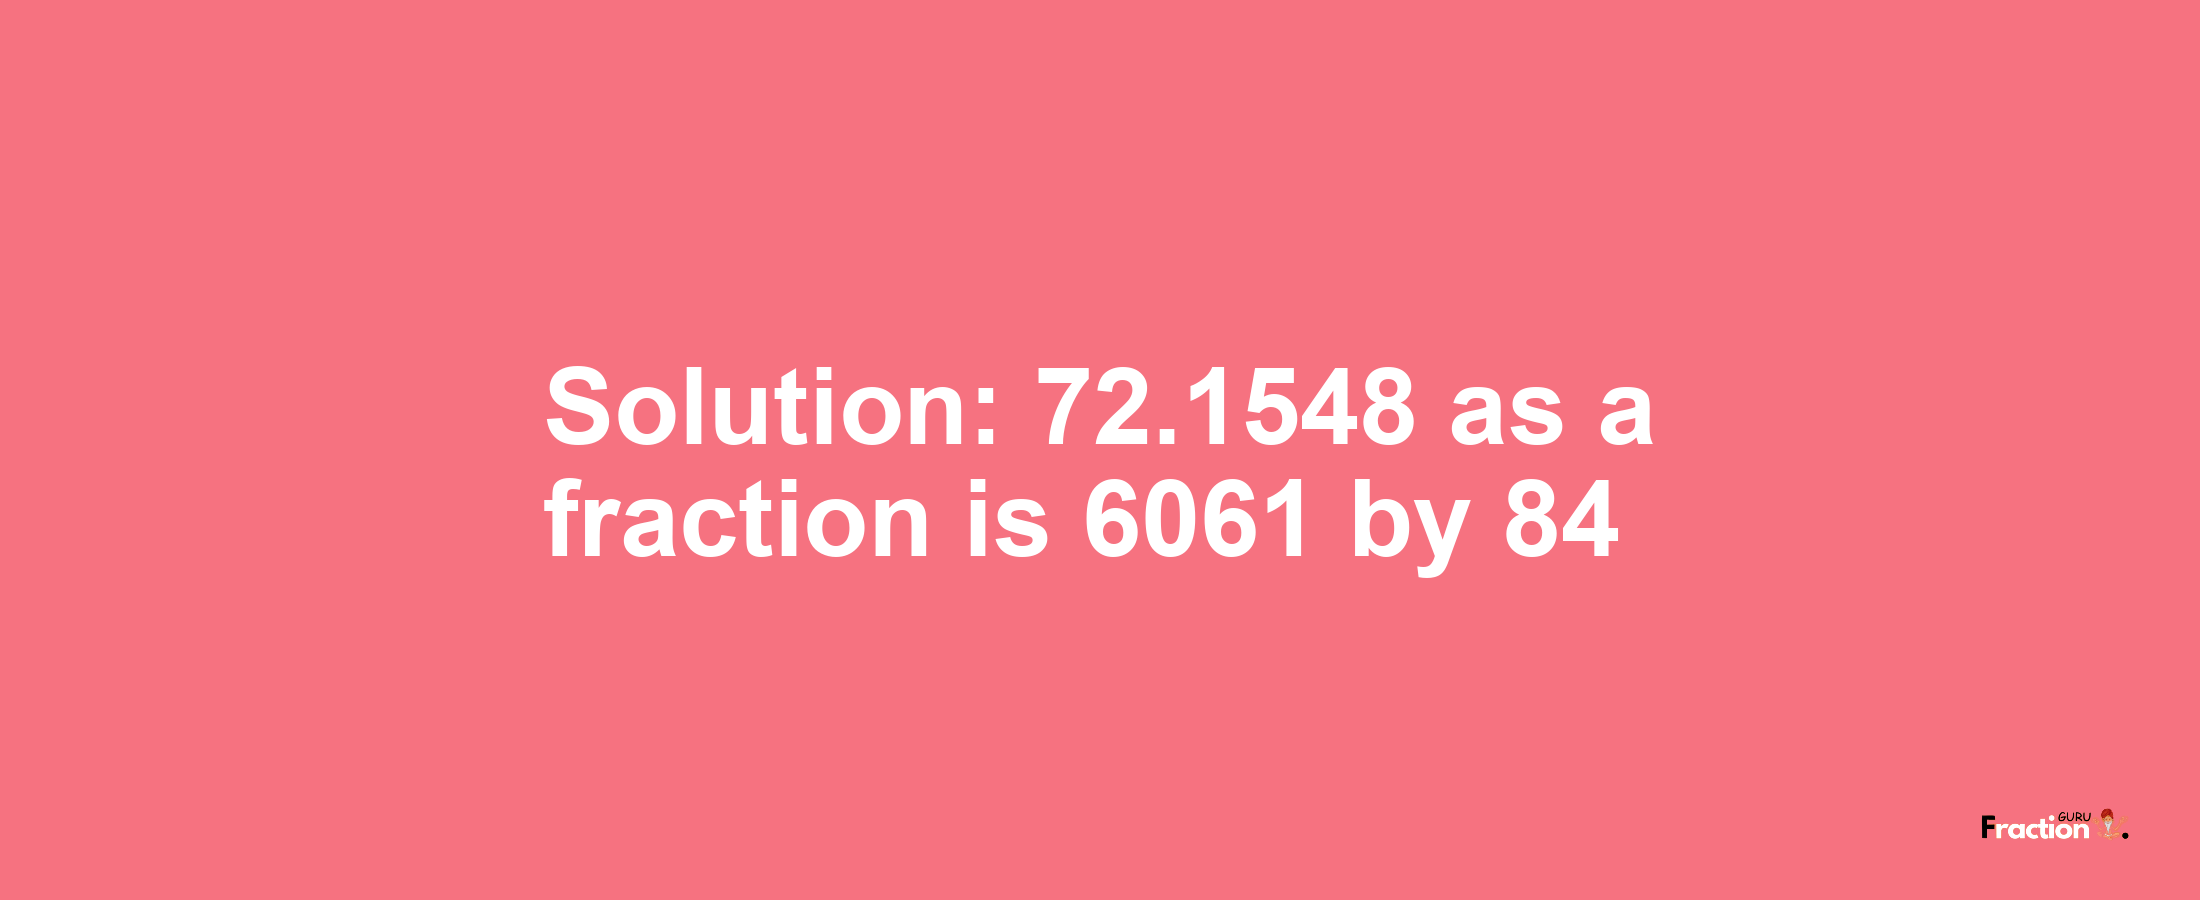 Solution:72.1548 as a fraction is 6061/84